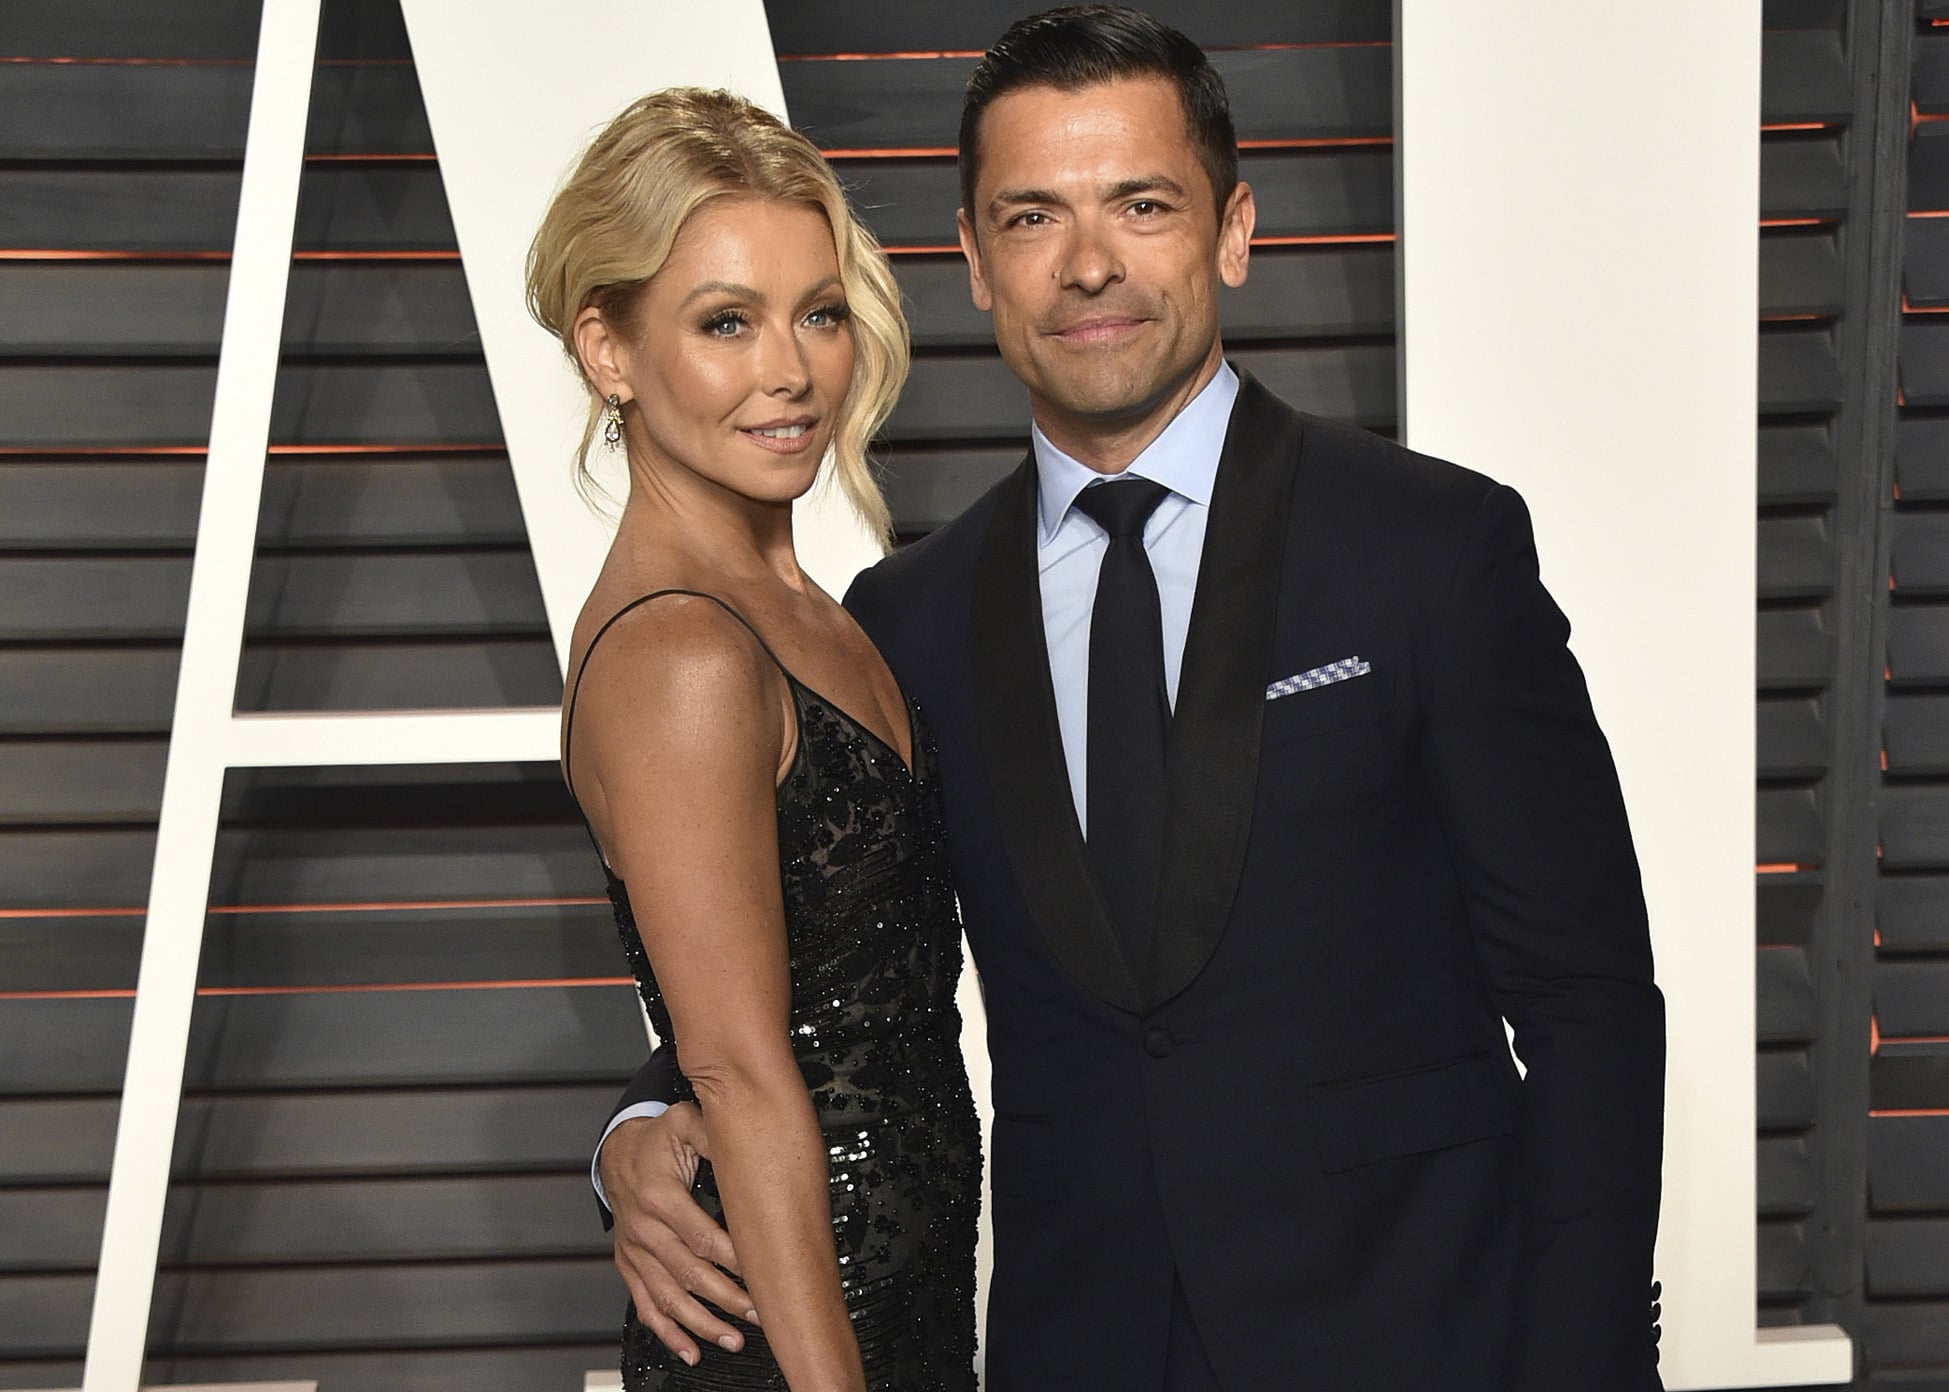 BEVERLY HILLS, CA - FEBRUARY 28:  TV personality Kelly Ripa (L) and Mark Consuelos arrive at the 2016 Vanity Fair Oscar Party Hosted By Graydon Carter at Wallis Annenberg Center for the Performing Arts on February 28, 2016 in Beverly Hills, California.  (Photo by John Shearer/Getty Images)